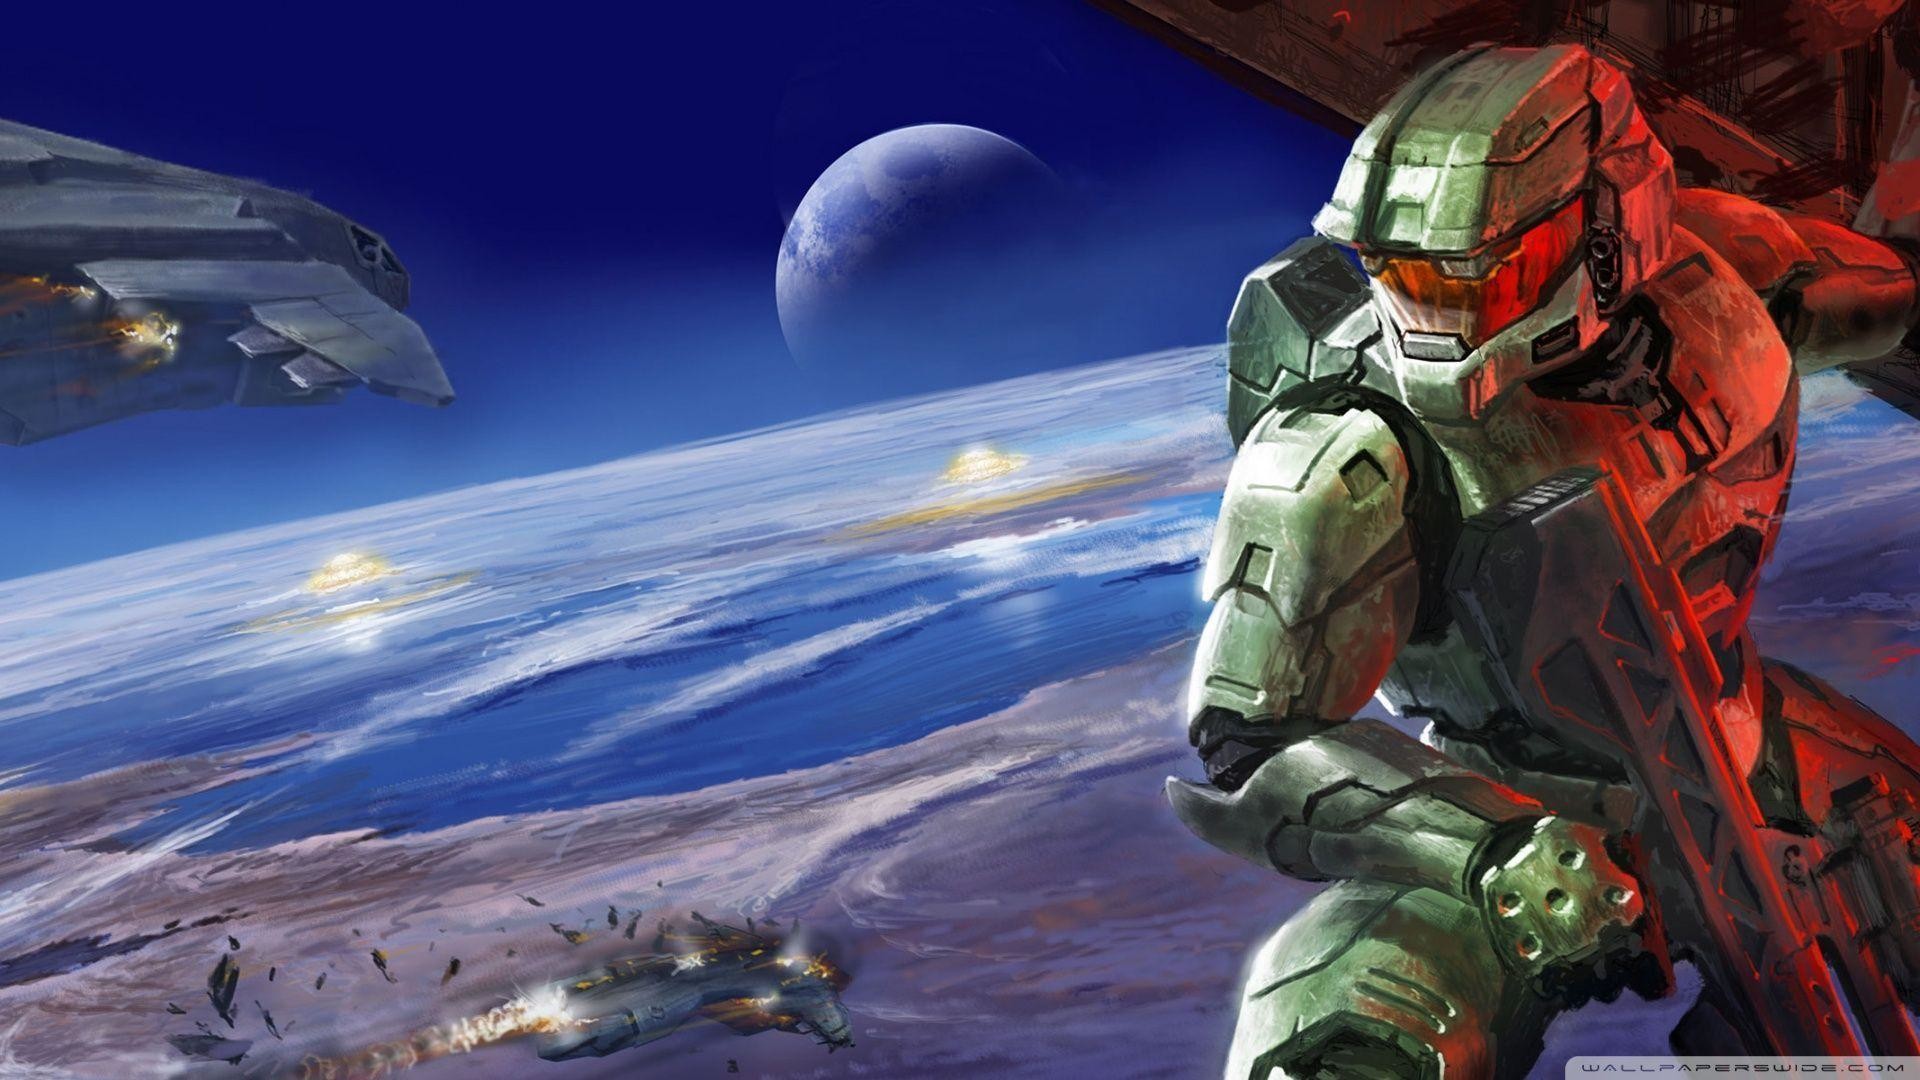 1920x1080 Wallpapers For > Halo Ring Wallpaper 